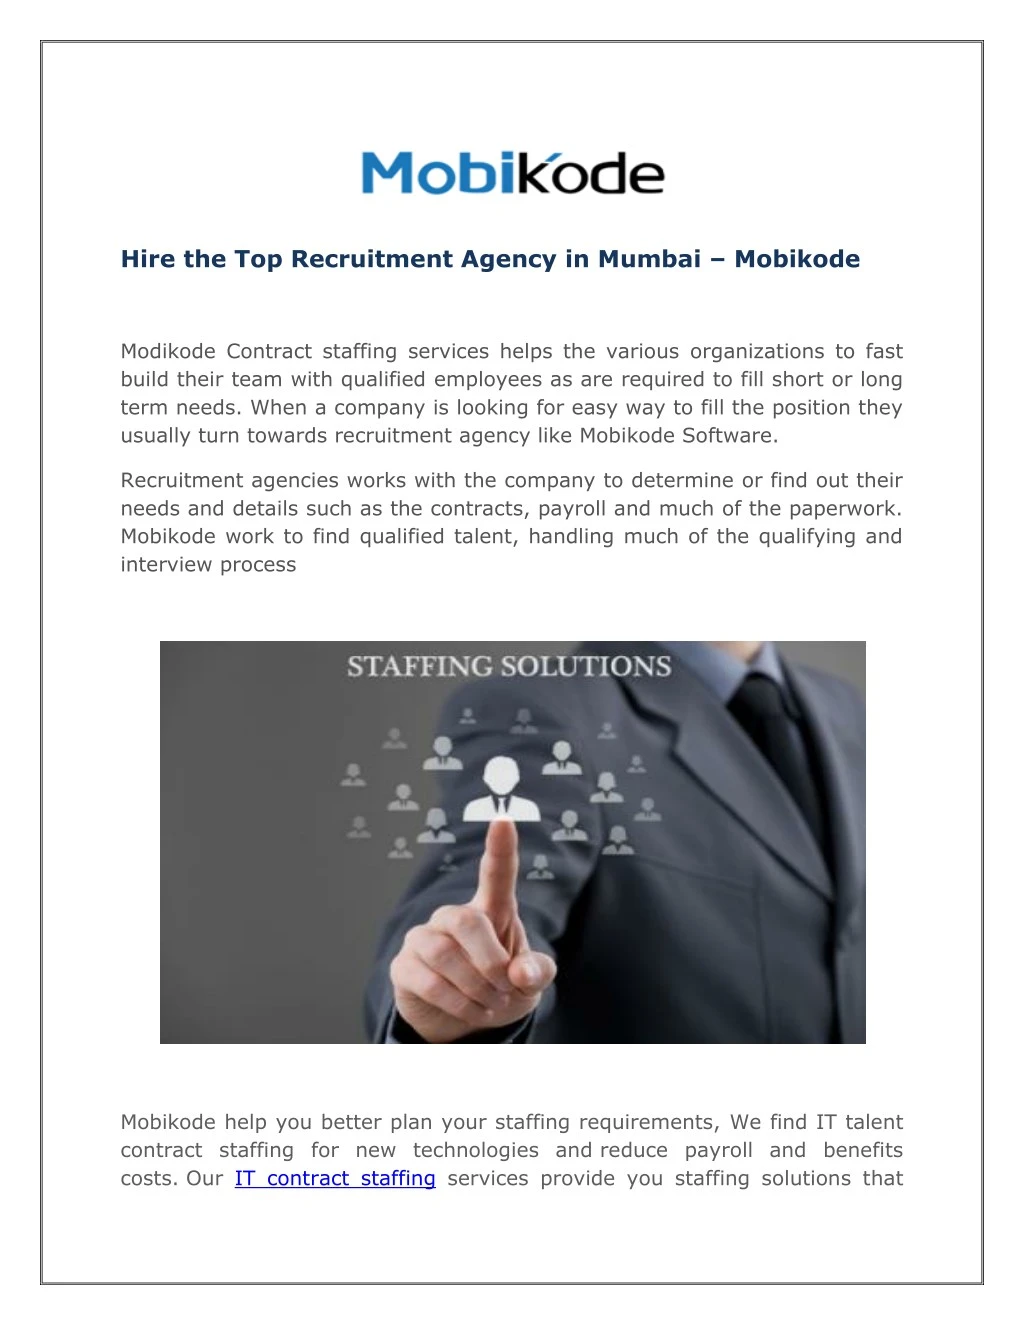 hire the top recruitment agency in mumbai mobikode